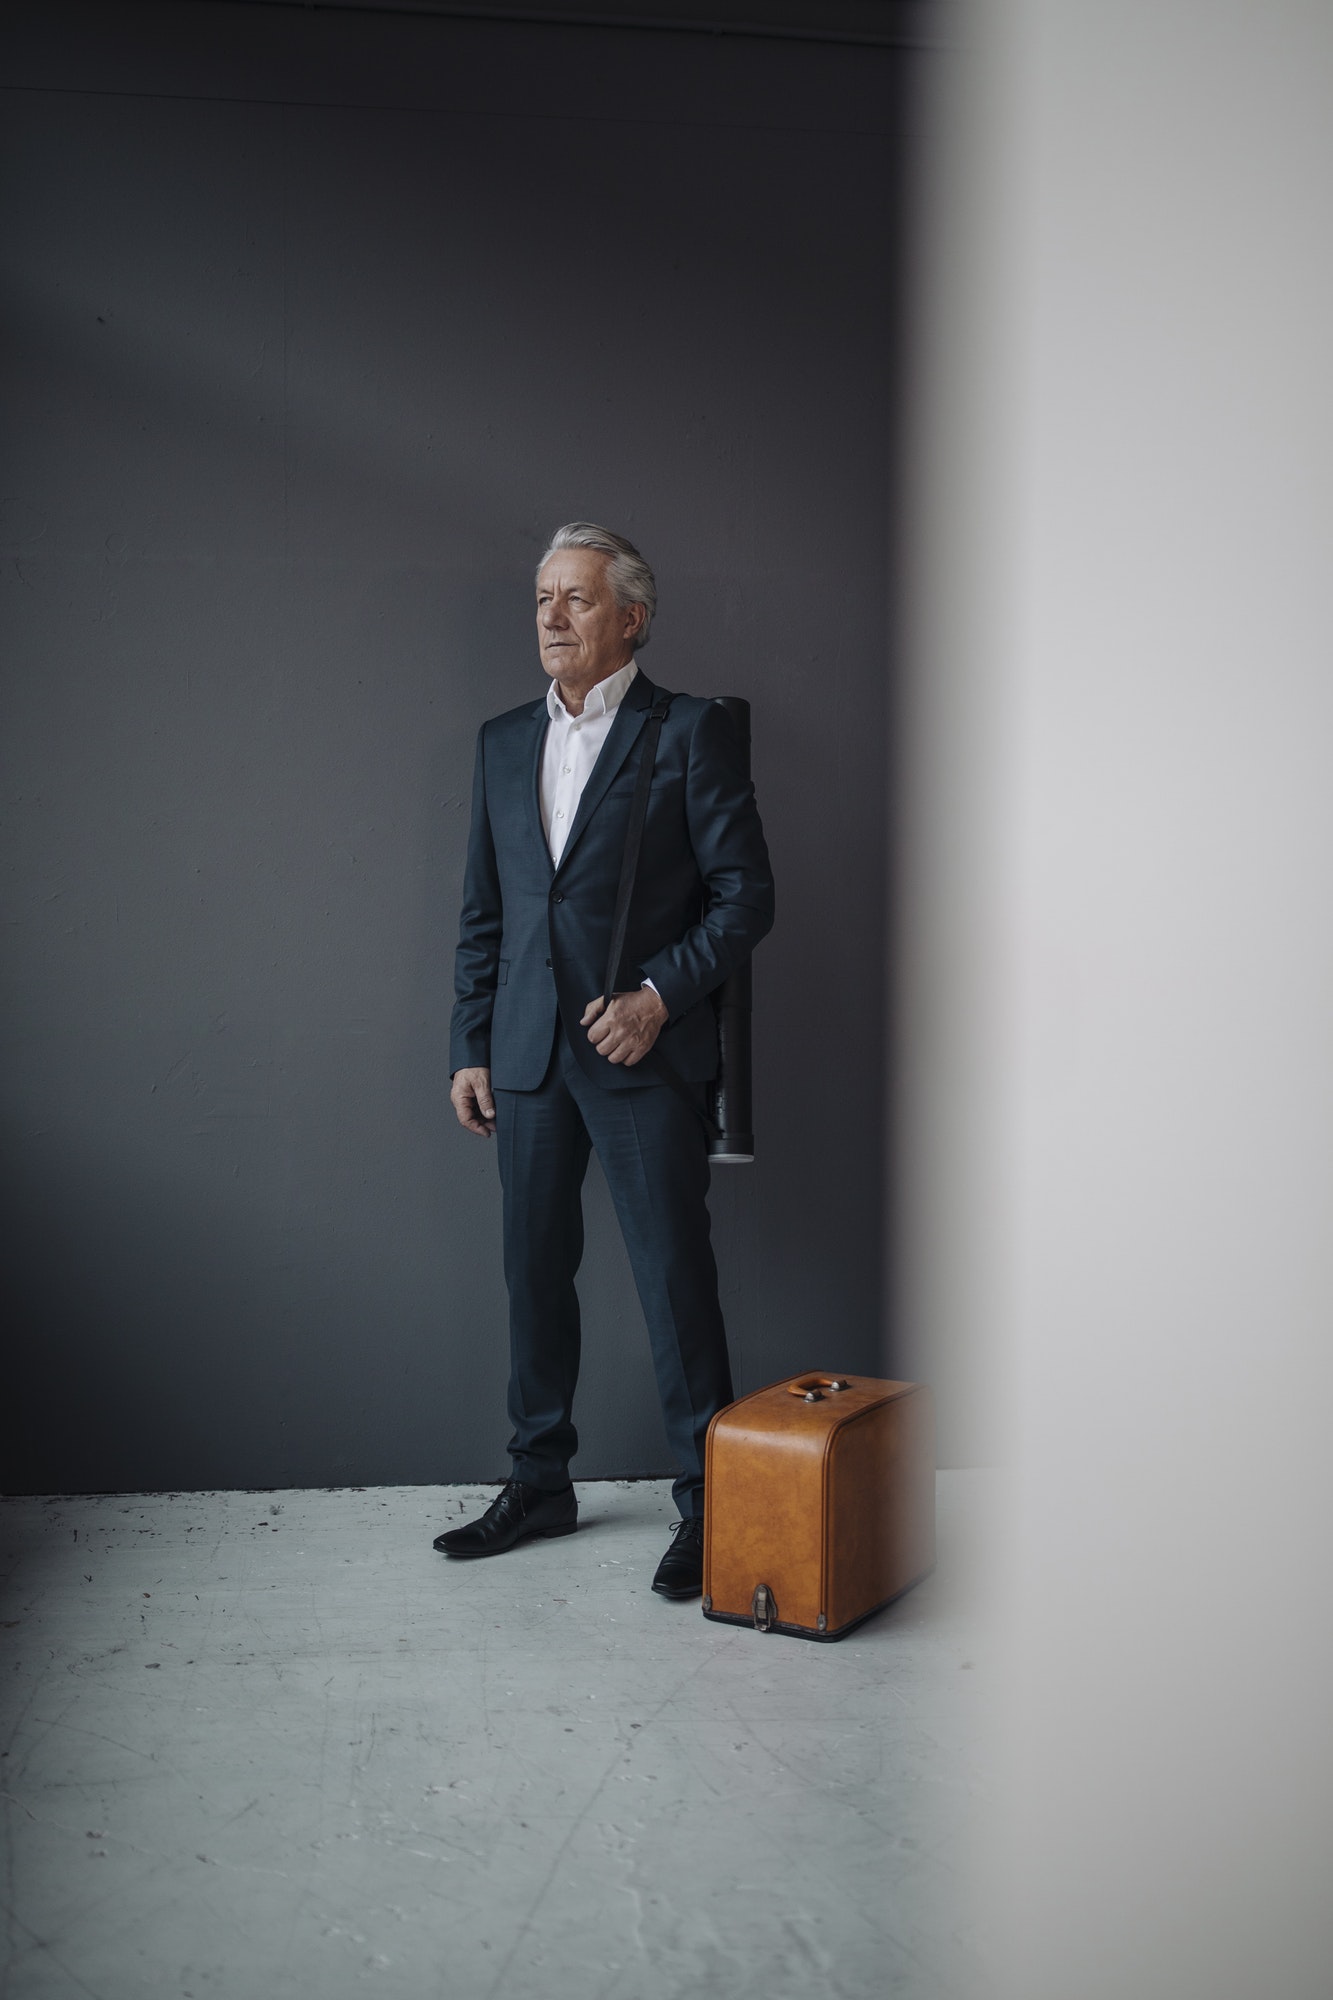 Senior businessman with old-fashioned suitcase